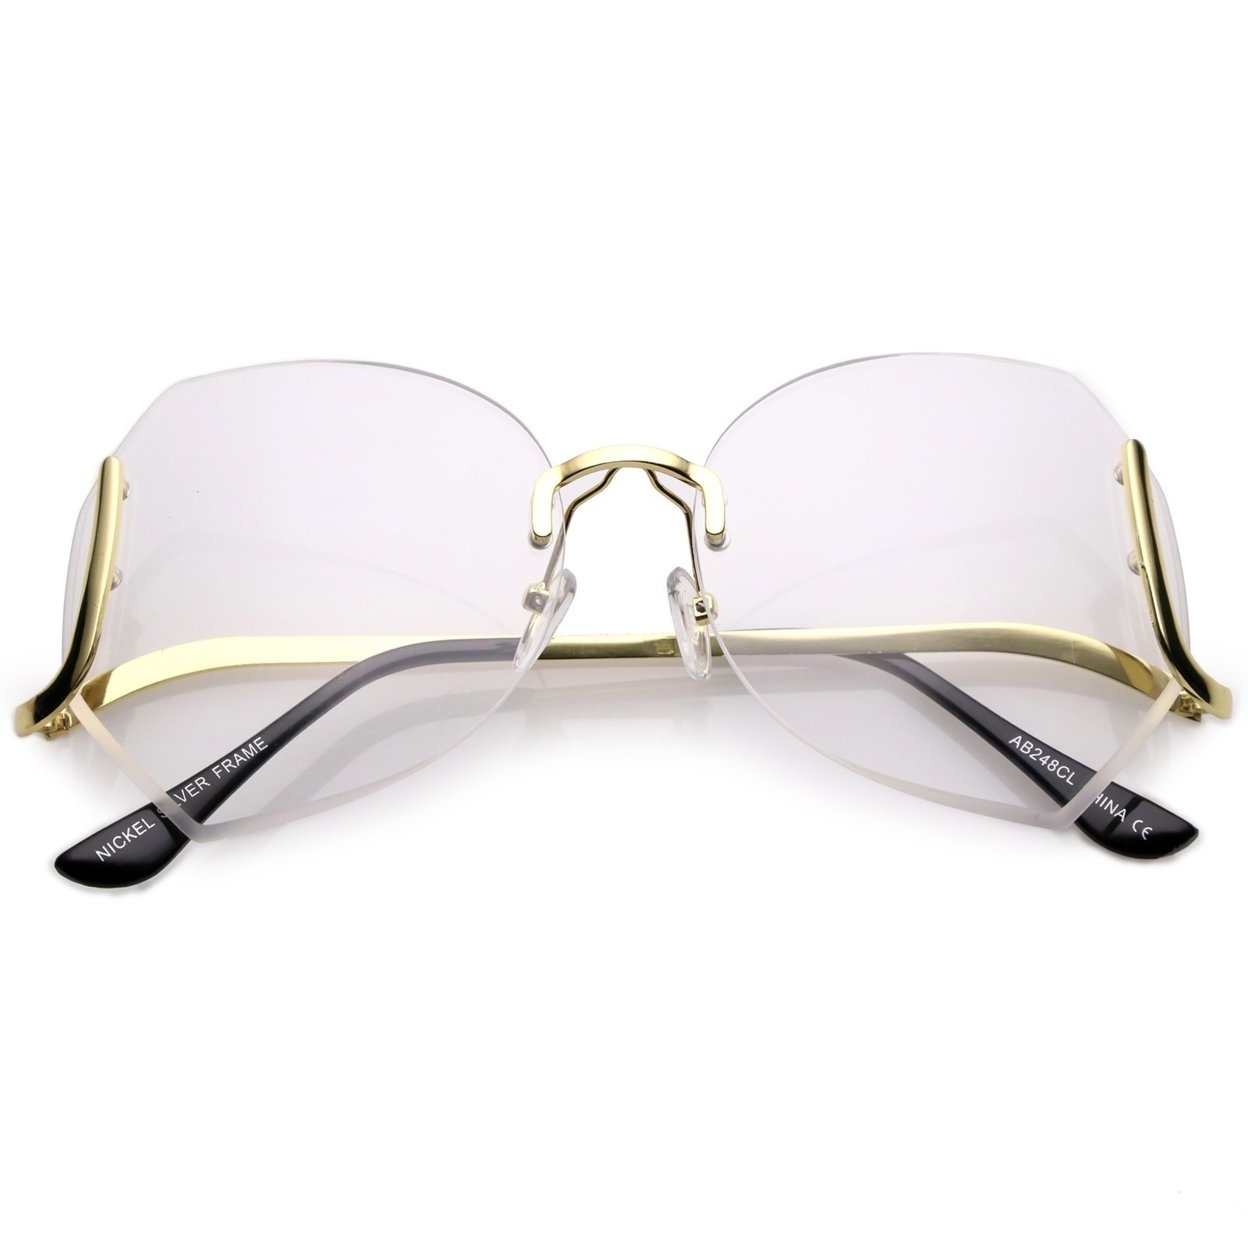 Oversize Beveled Butterfly Rimless Round Glasses Curved Metal Arms Clear Lens 60mm - Gold / Clear Tinted